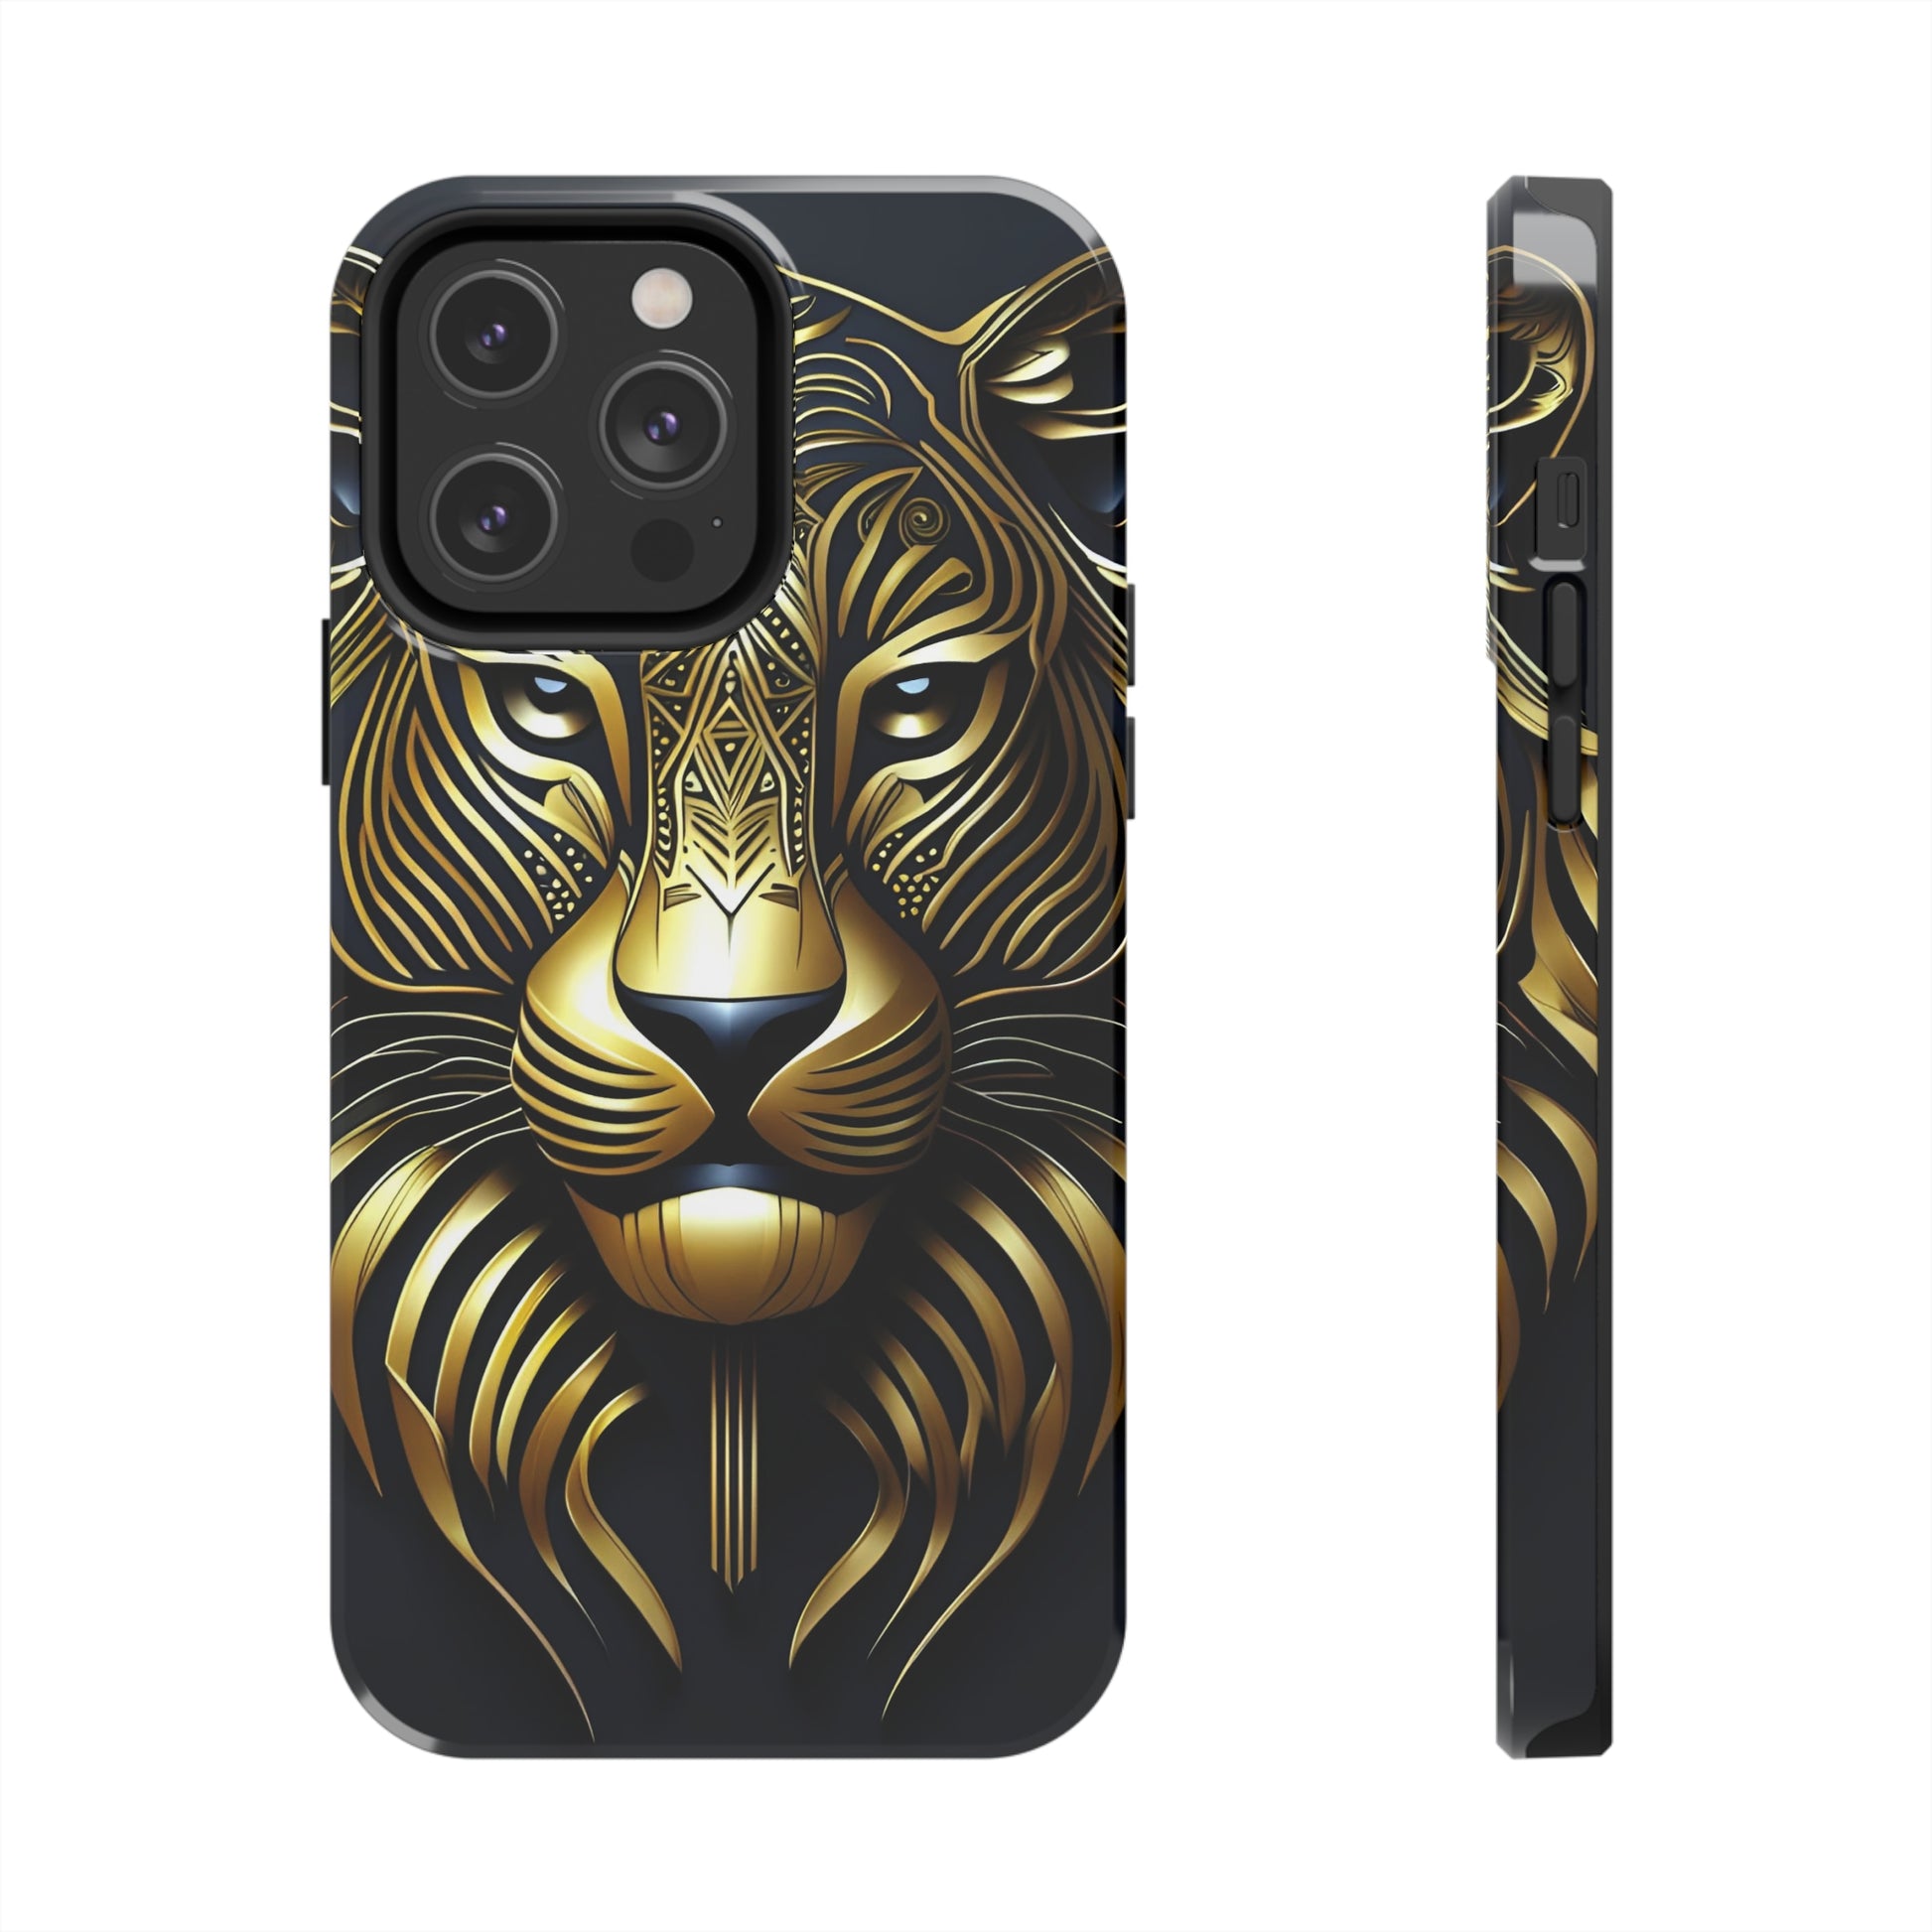 Tough Phone Case for iPhone 14 - Blue and Gold Tribal Tiger Head Art Deco Style Printed on Phone Case for iPhone 14 Pro Max